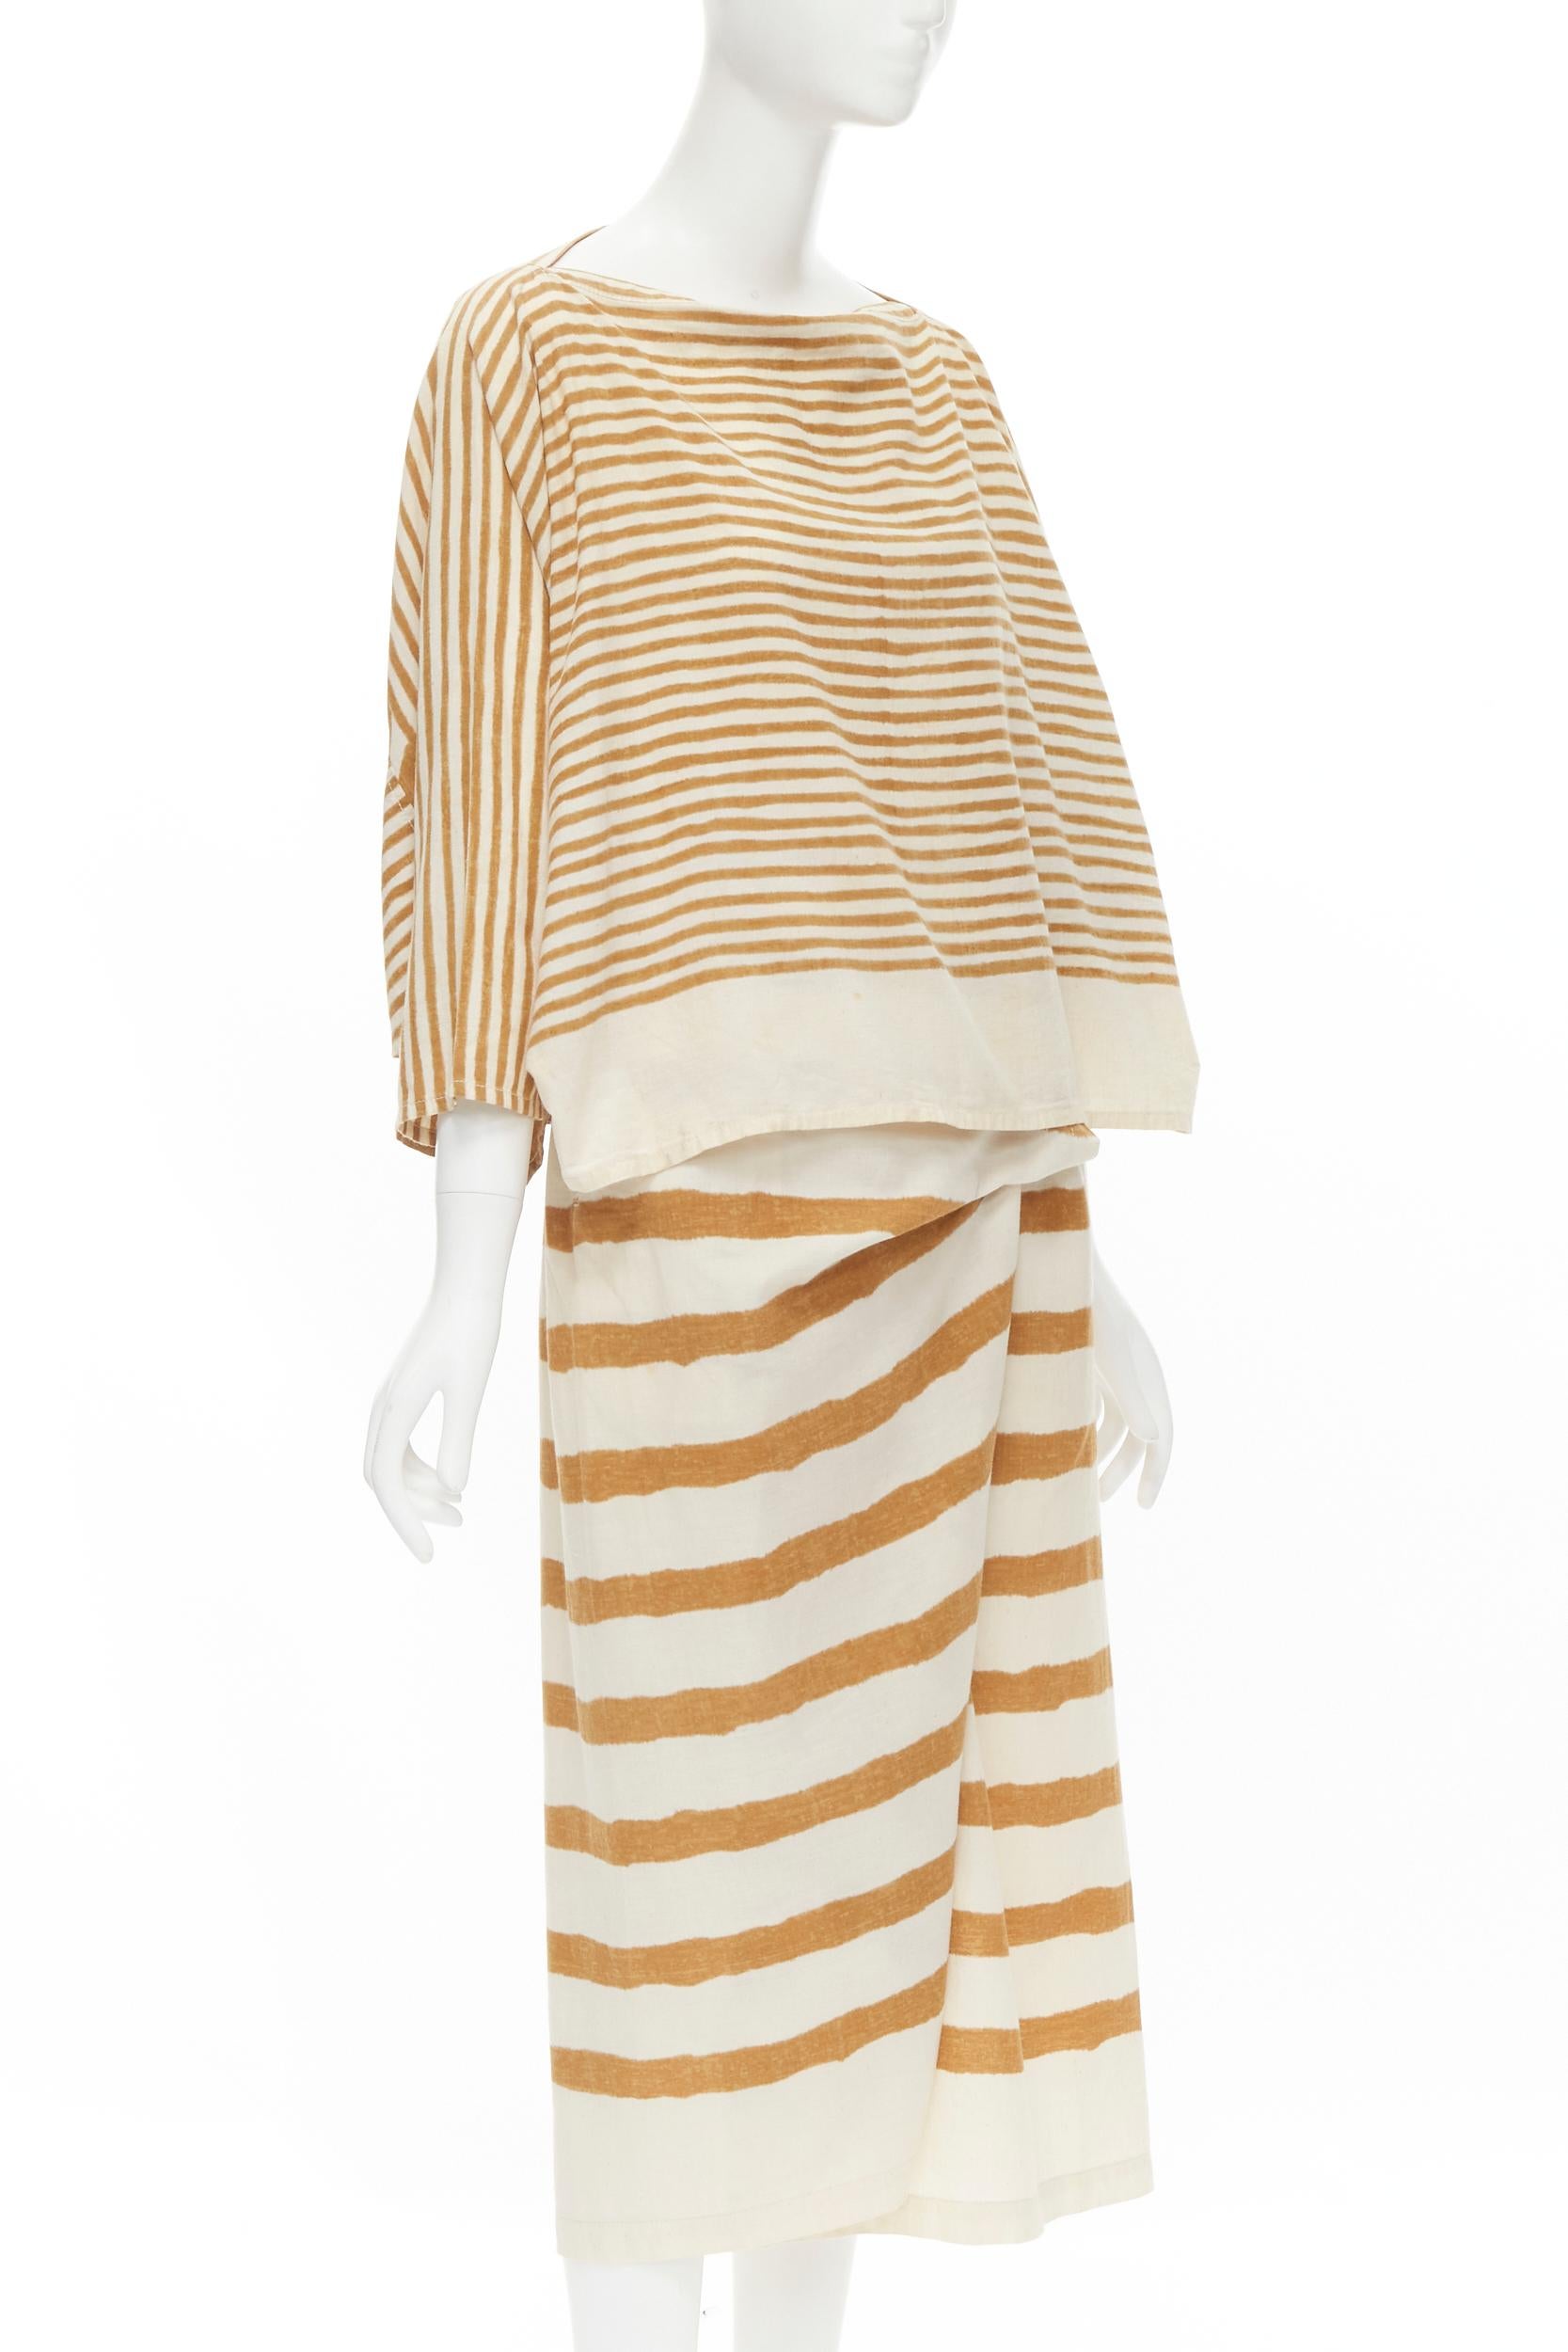 ISSEY MIYAKE 1980's Vintage beige yellow tribal stripe boxy top skirt set 
Reference: CRTI/A00505 
Brand: Issey Miyake 
Collection: 1980's 
Material: Cotton 
Color: Beige 
Pattern: Striped 
Closure: Button 
Extra Detail: Boat neck. Dolman sleeves.